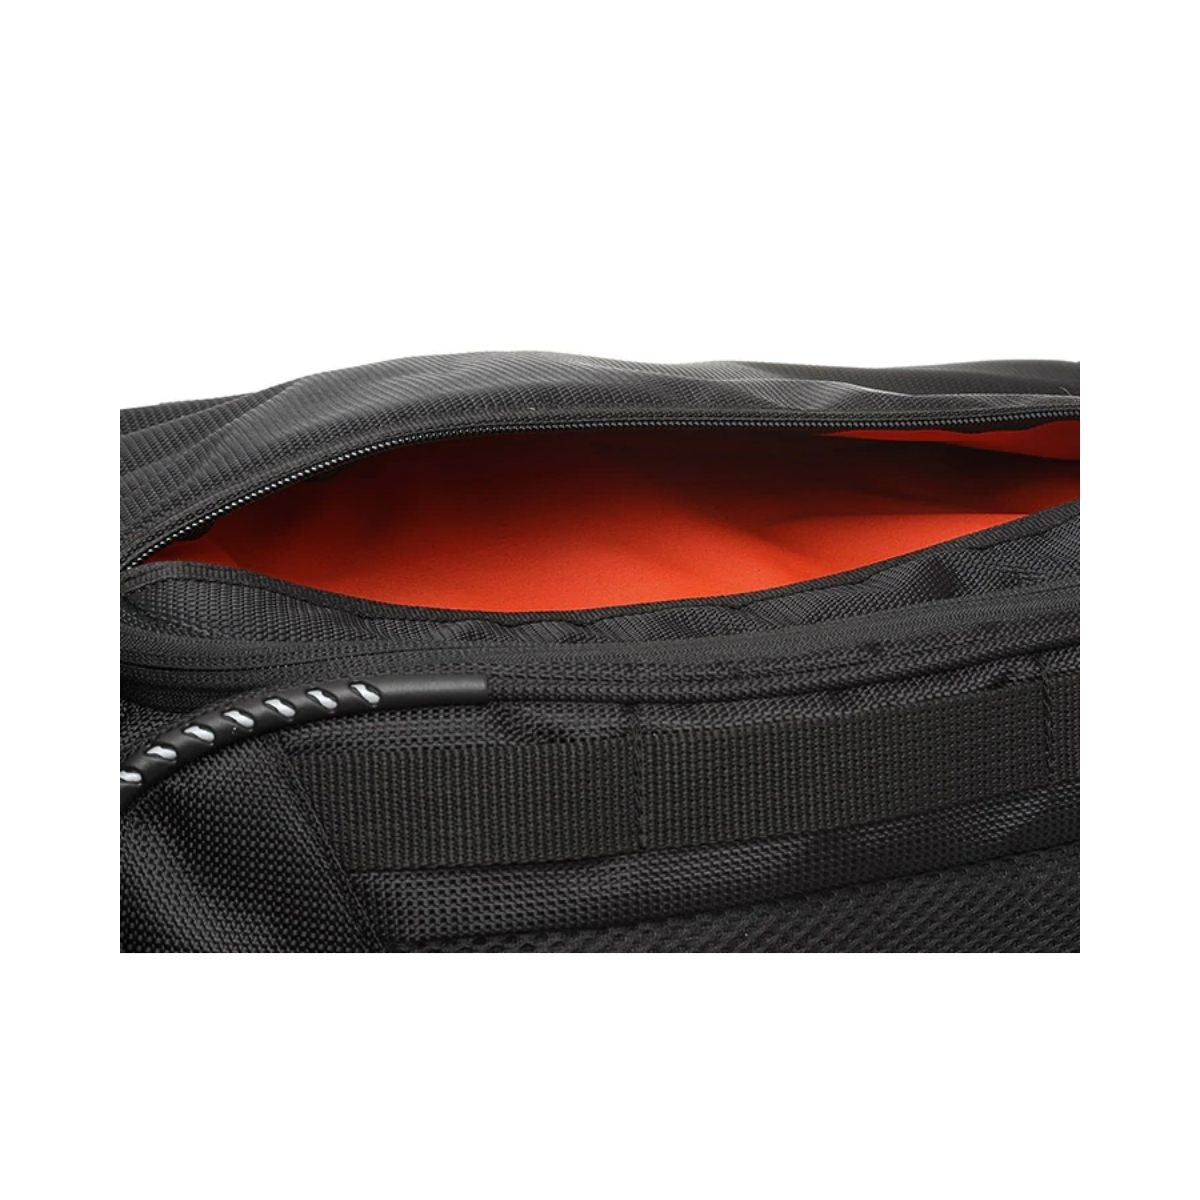 Rhino 70L Tail Bag with Rain Cover and Dry Bag - Black - 6